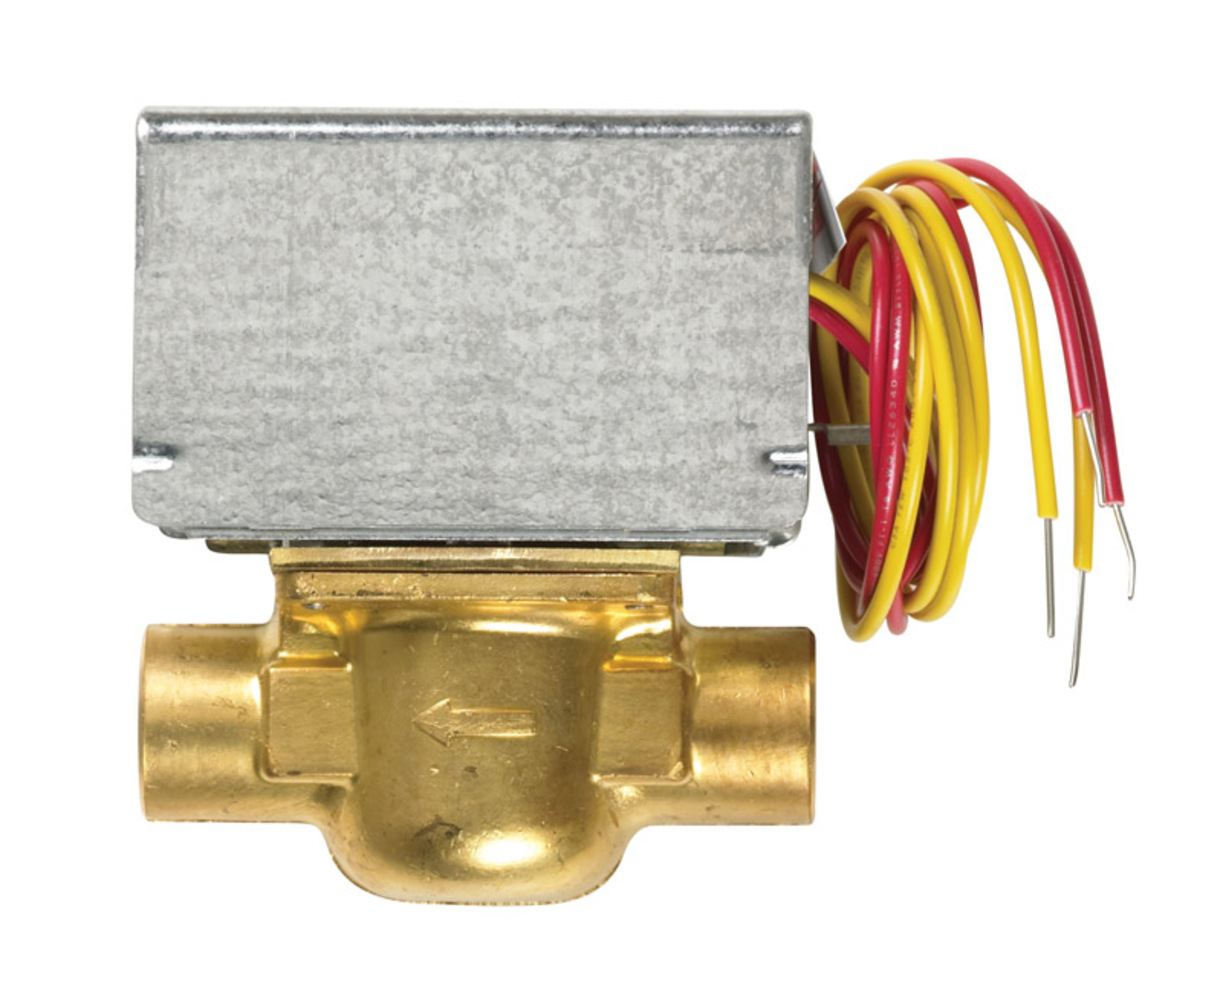 Honeywell 0.8 in. Stainless Steel Zone Valve - image 2 of 2